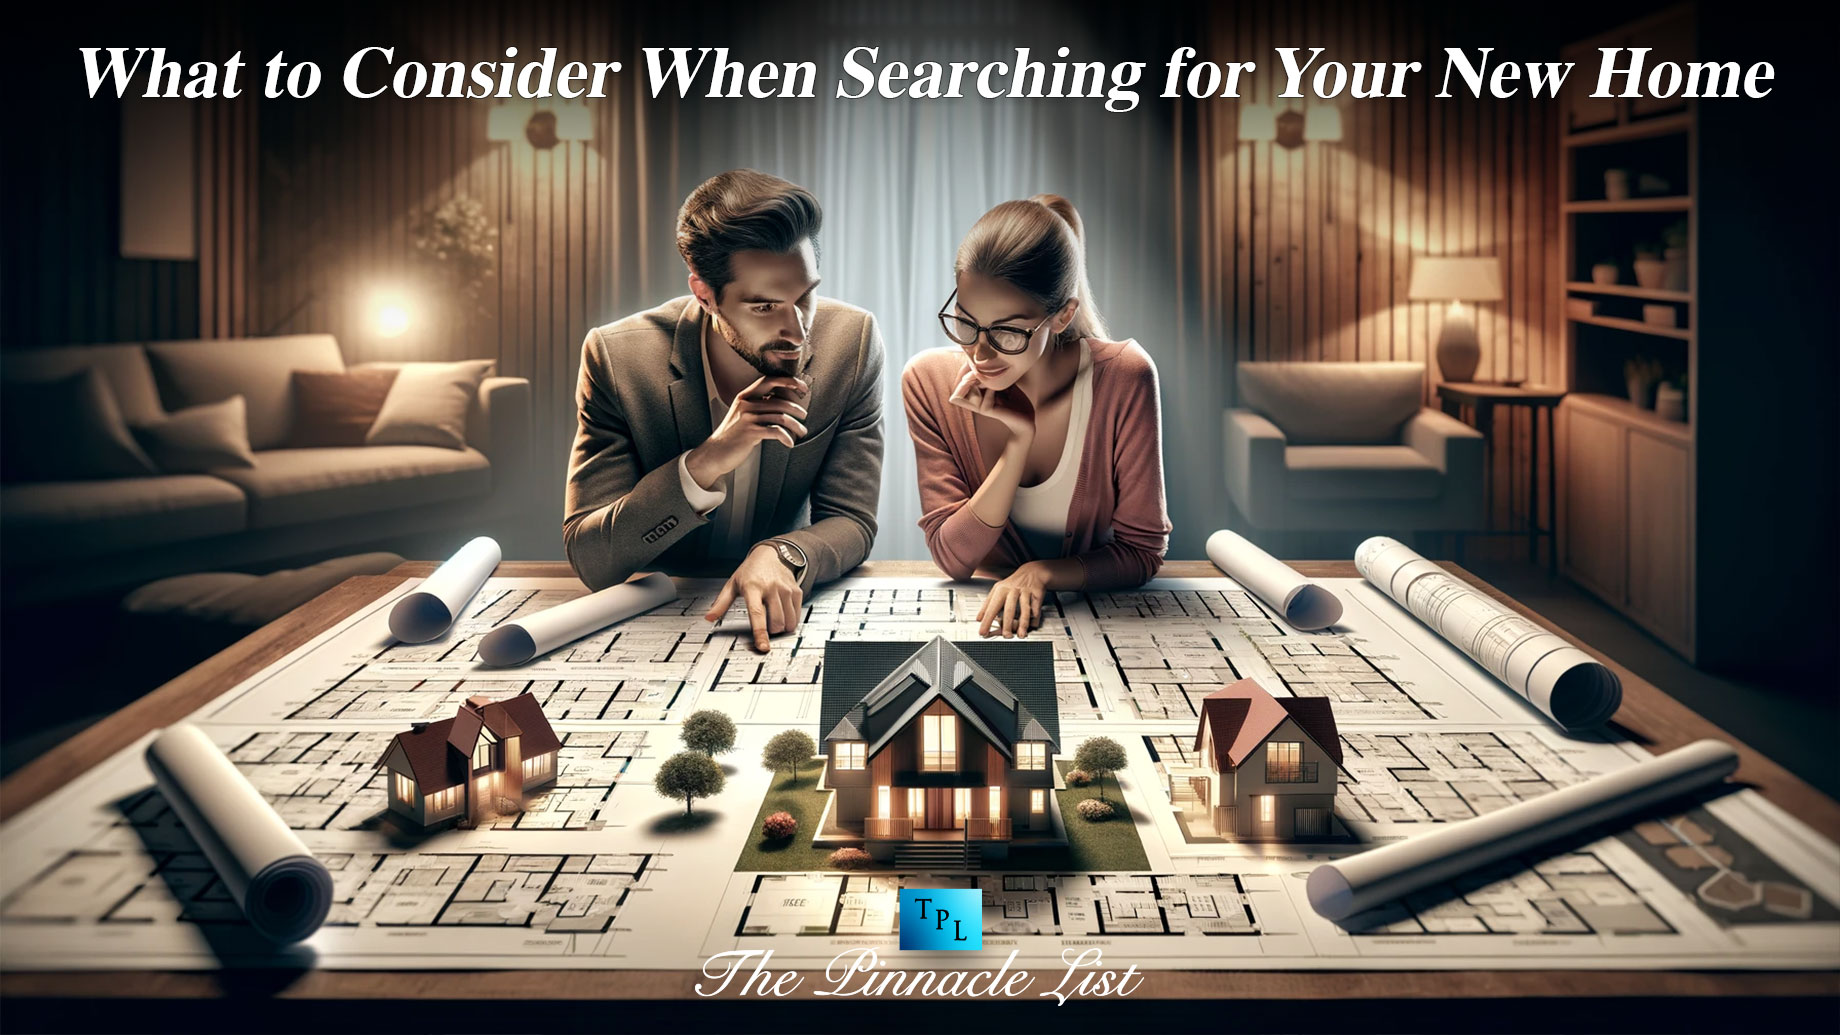 What to Consider When Searching for Your New Home